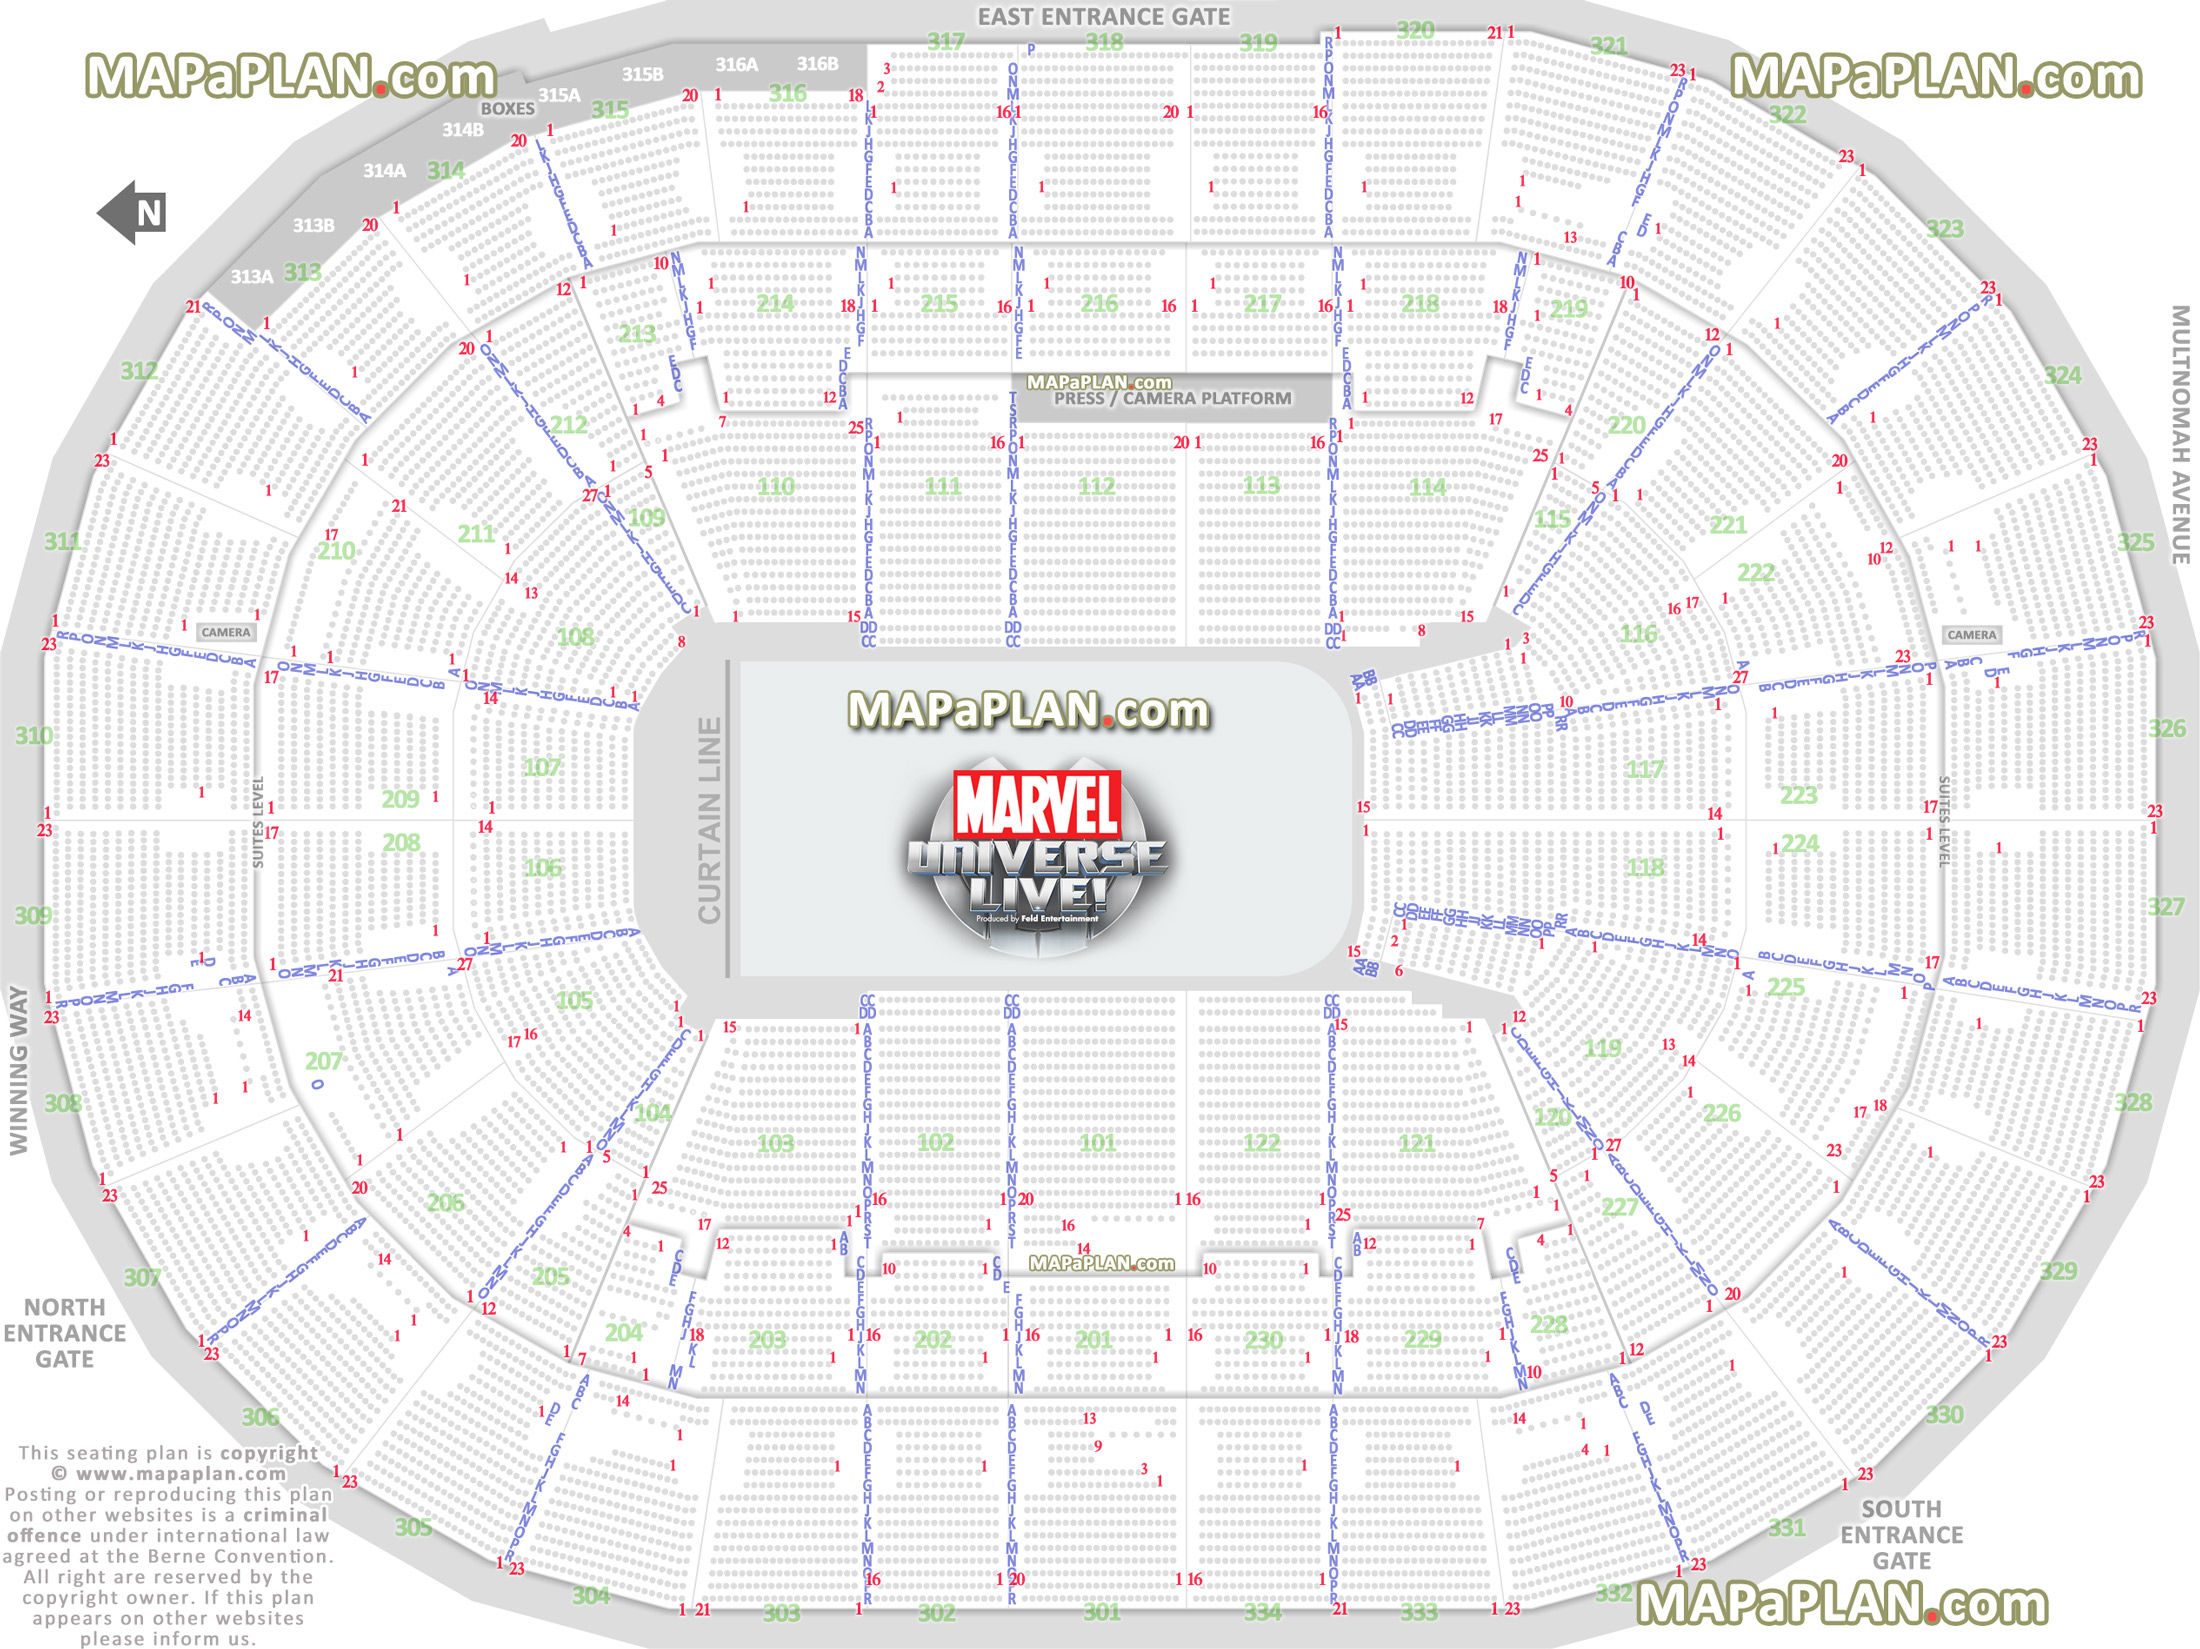 marvel universe live new show interactive balcony best seat selection arrangement review diagram sections 105 203 209 215 224 229 301 304 308 310 311 318 330 334 333 334 Portland Moda Center seating chart